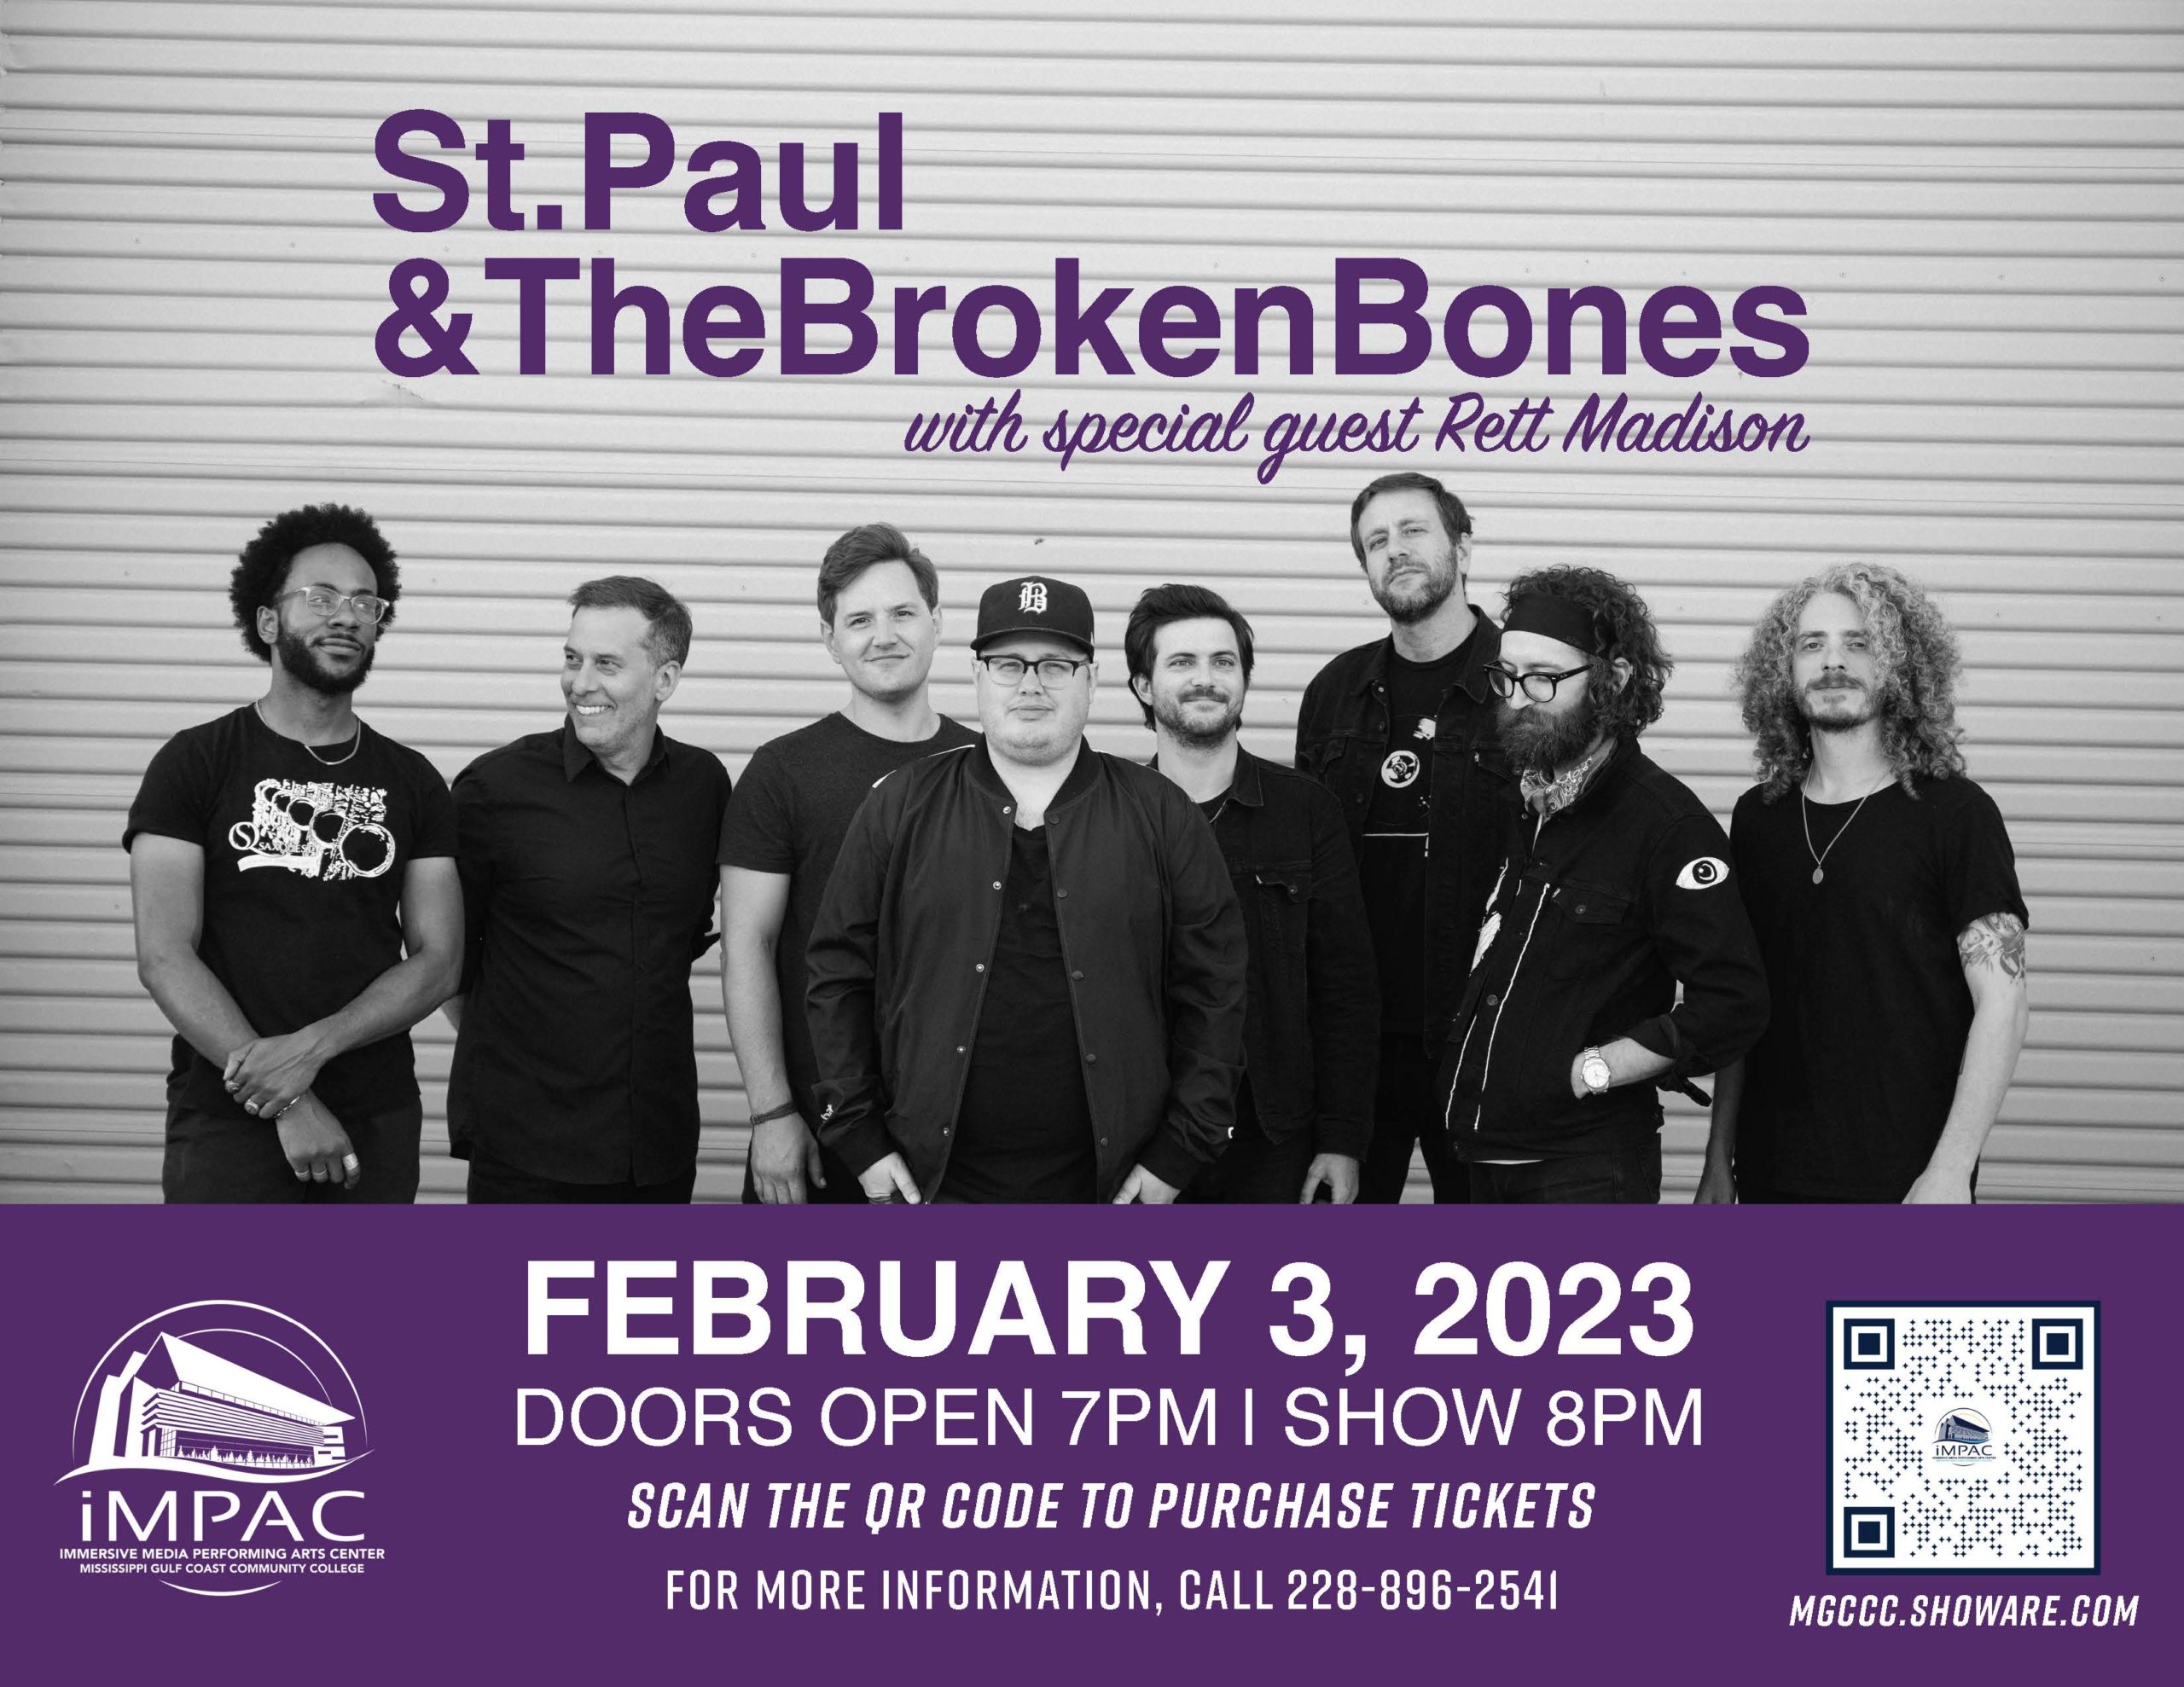 St. Paul & The Broken Bones to perform at MGCCC’s iMPAC in February